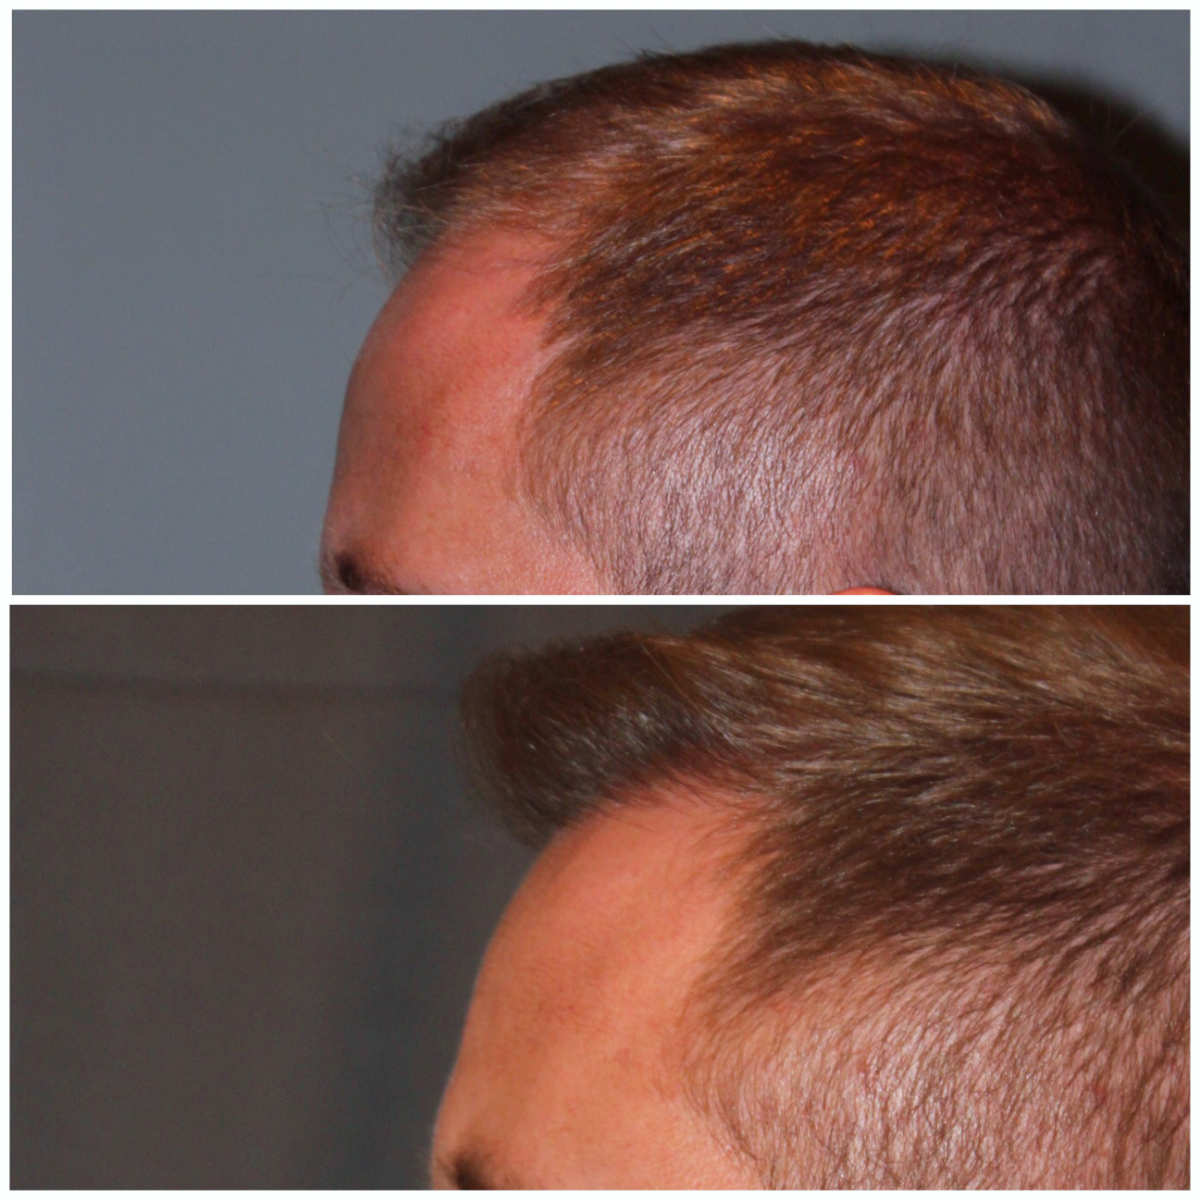 34 year old male 7 months post 2000 graft frontal hairline hair transplant. About 60% regrowth of what he will have at 18 months.